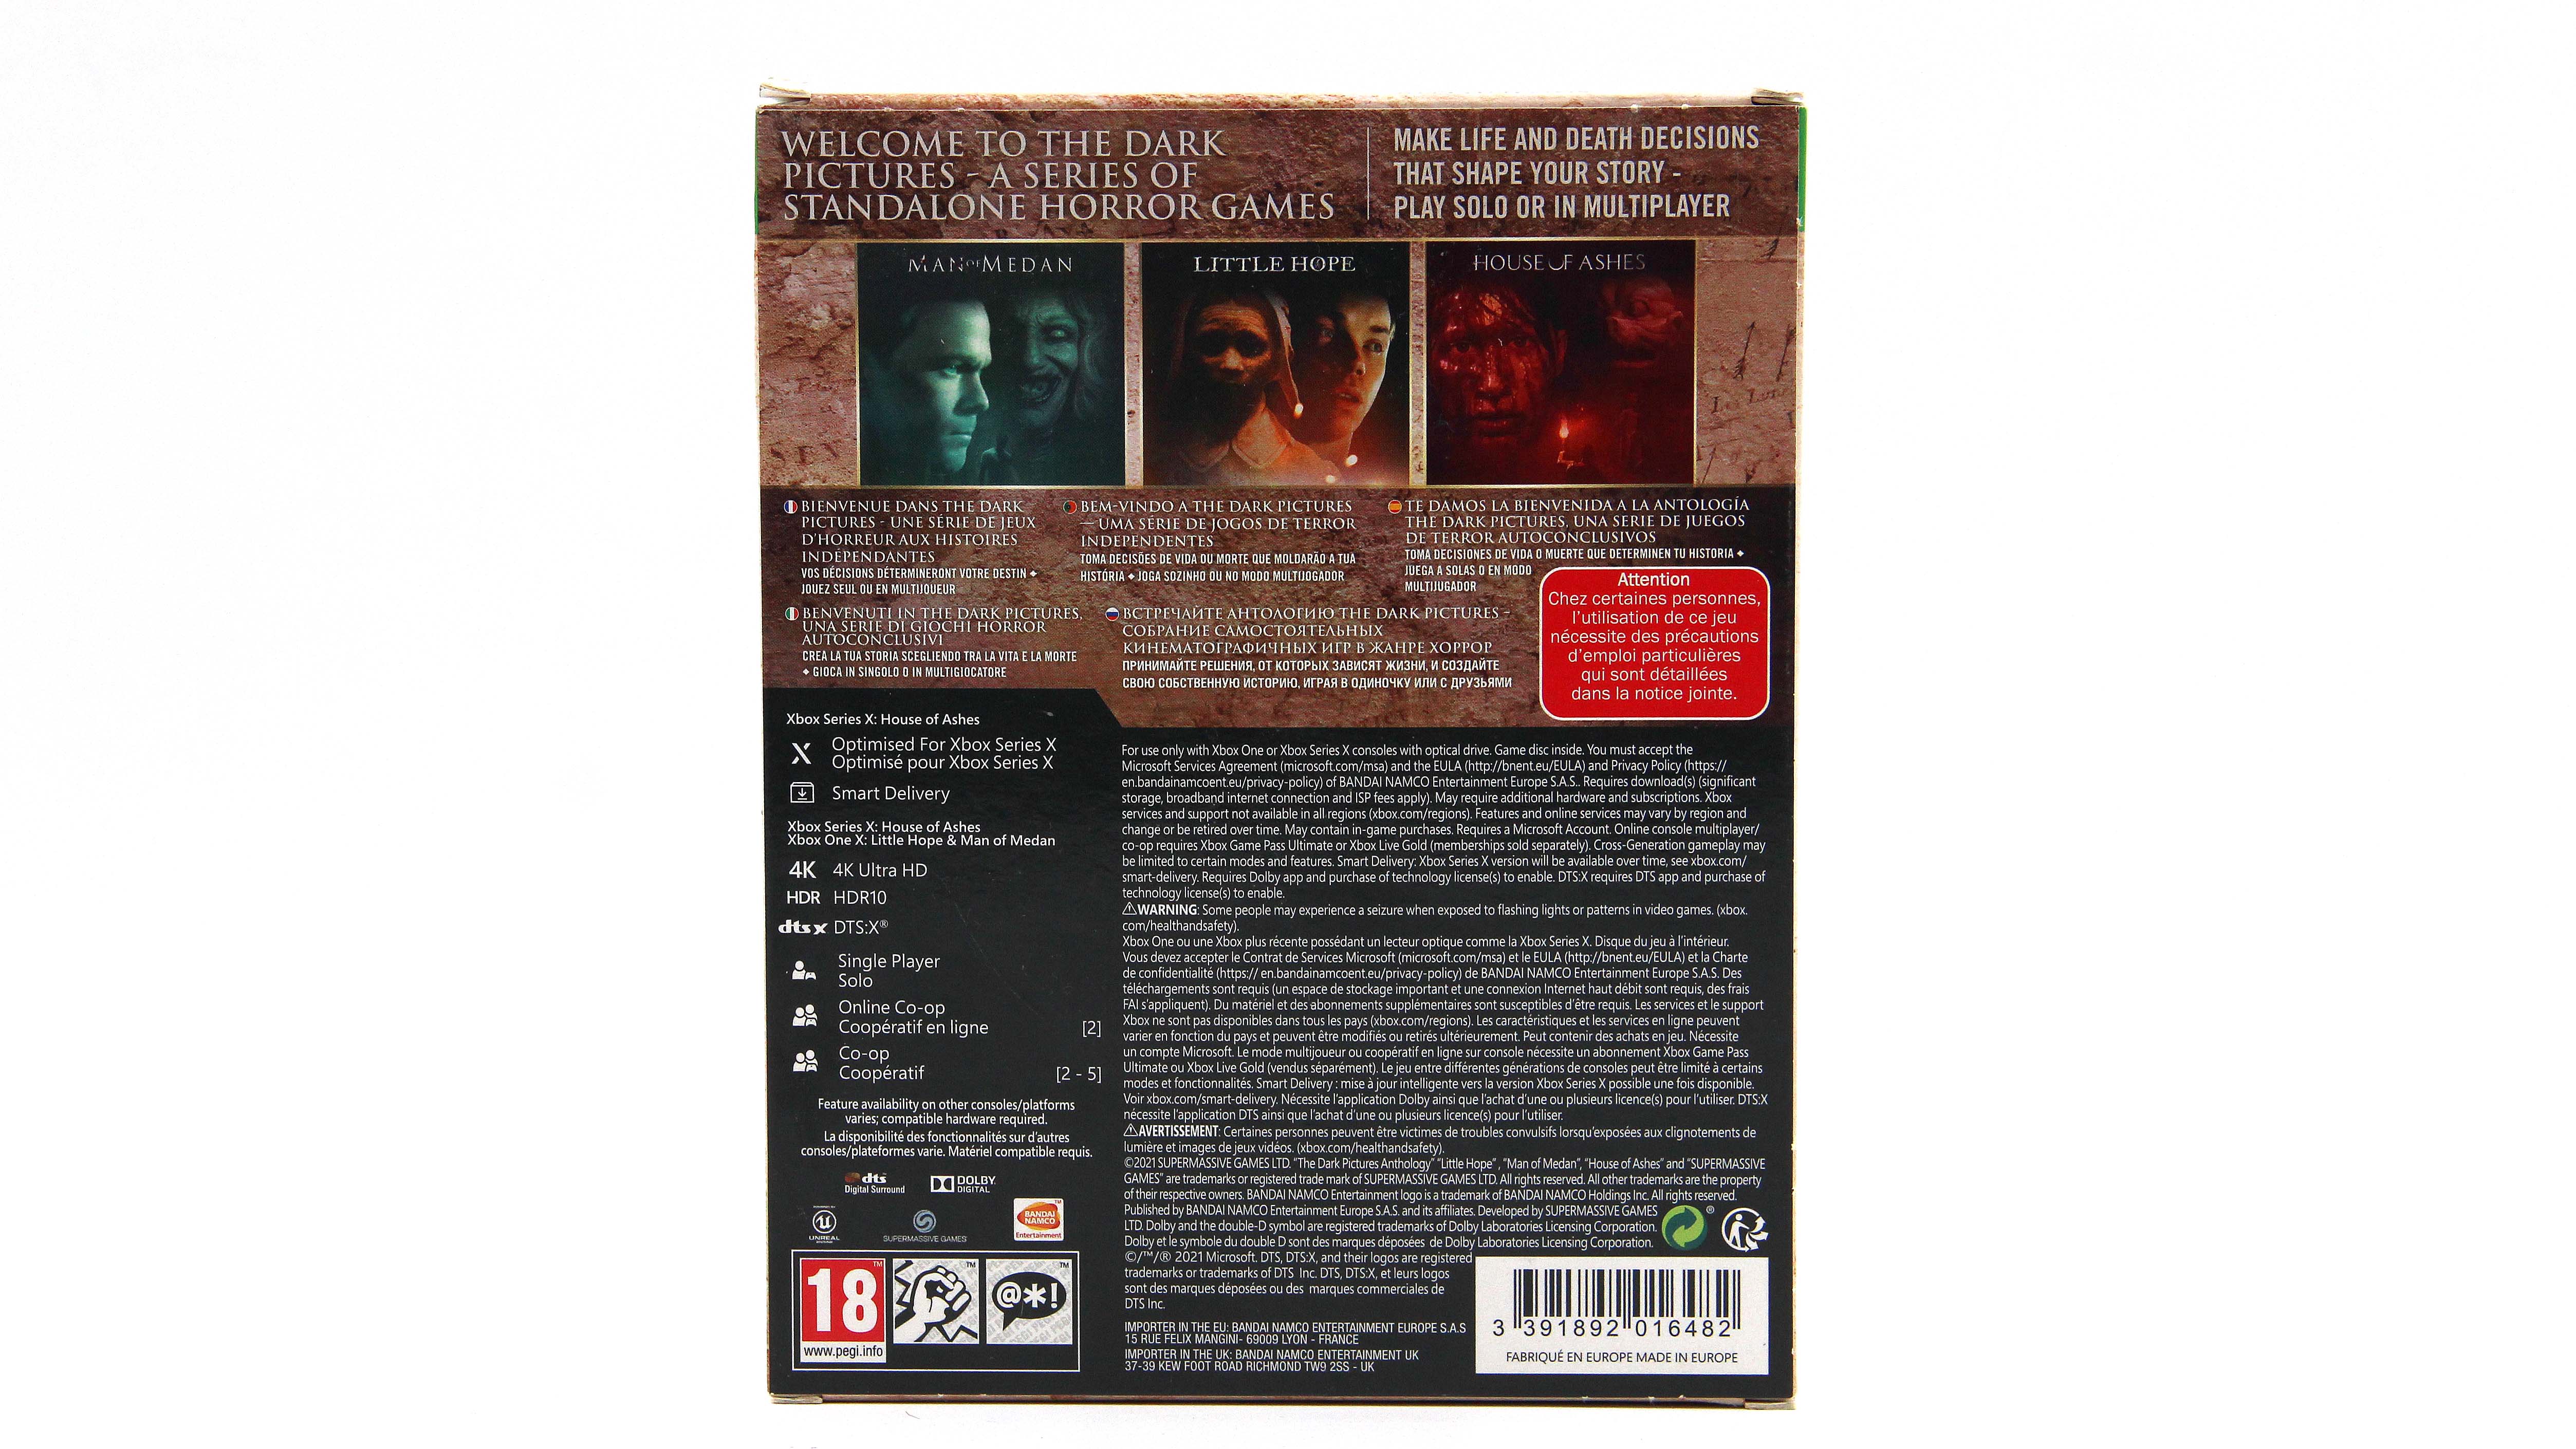 The dark pictures directive 8020 дата выхода. The Dark pictures. Triple Pack Xbox. The Dark pictures Anthology - Triple Pack. Dark pictures Anthology Triple Pack обзор. The Dark pictures Anthology Directive 8020 Дата выхода.